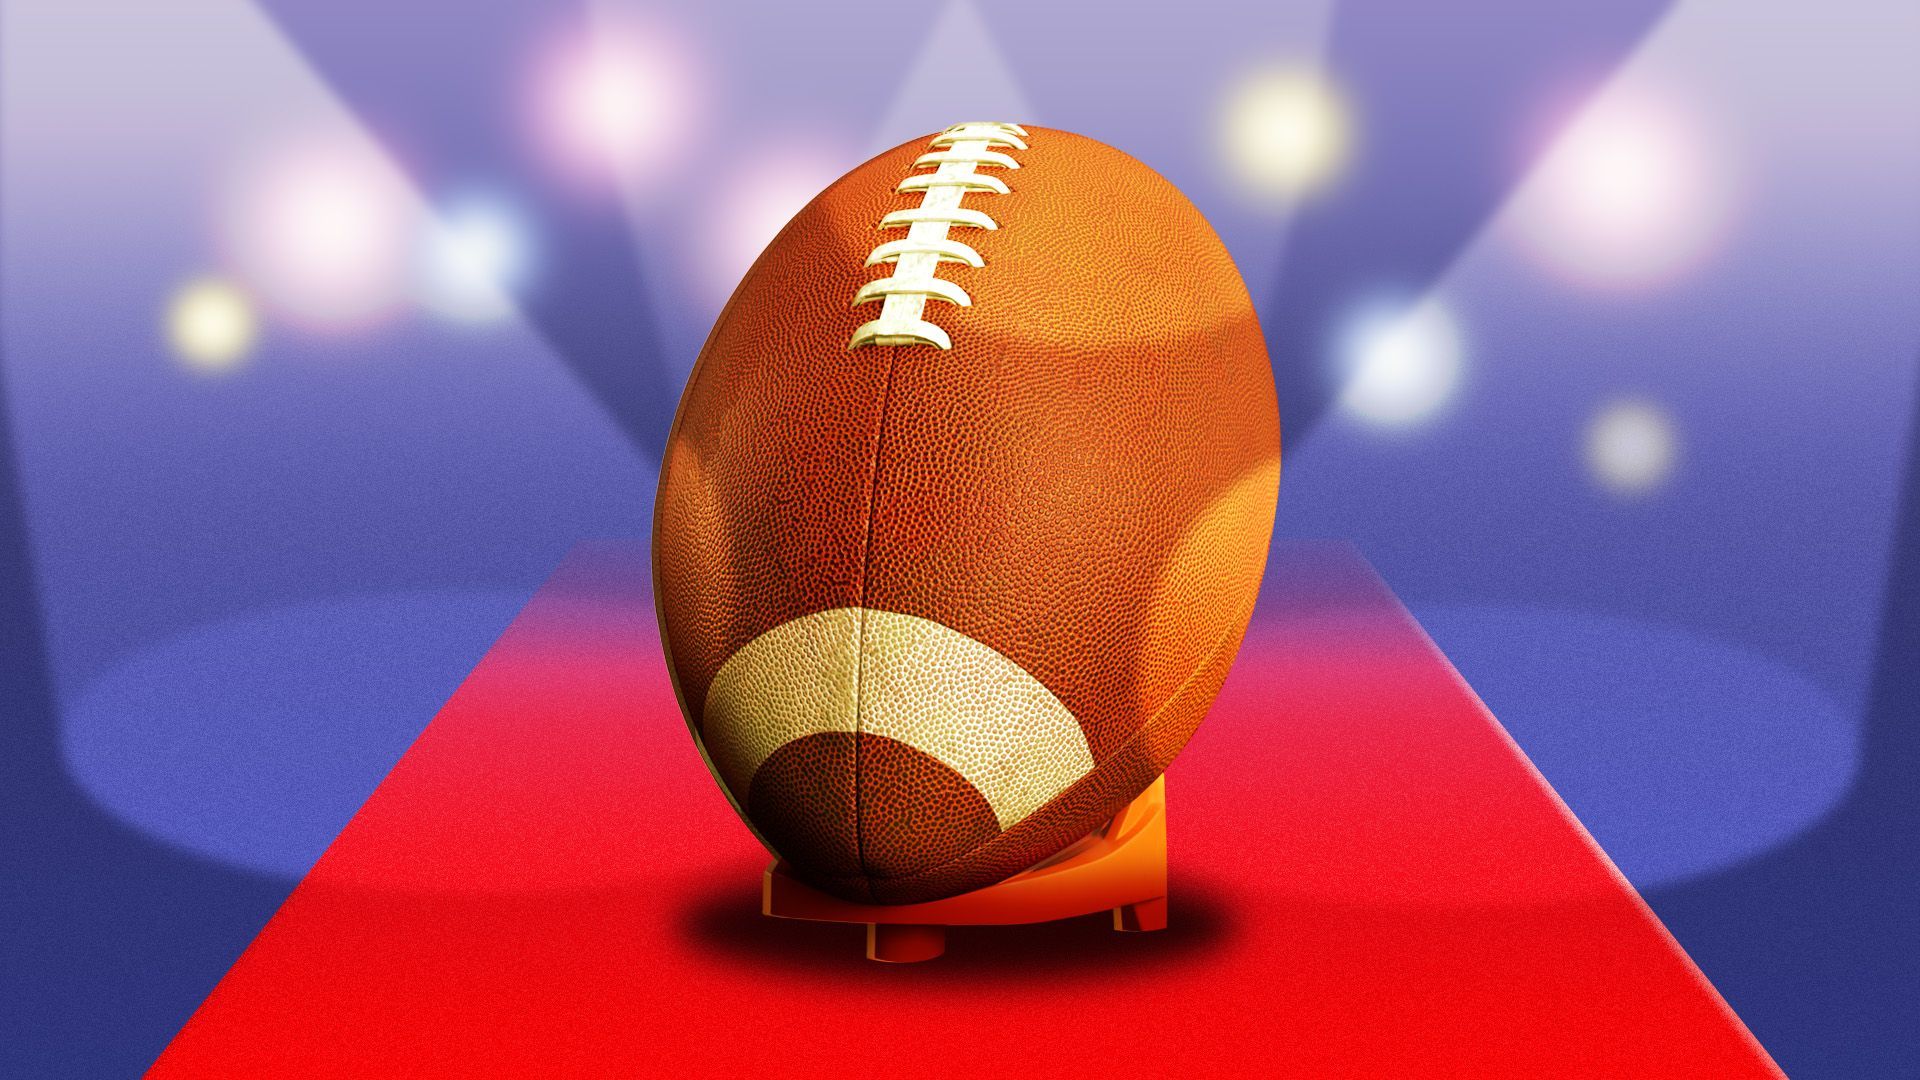 Illustration of a football on a red carpet